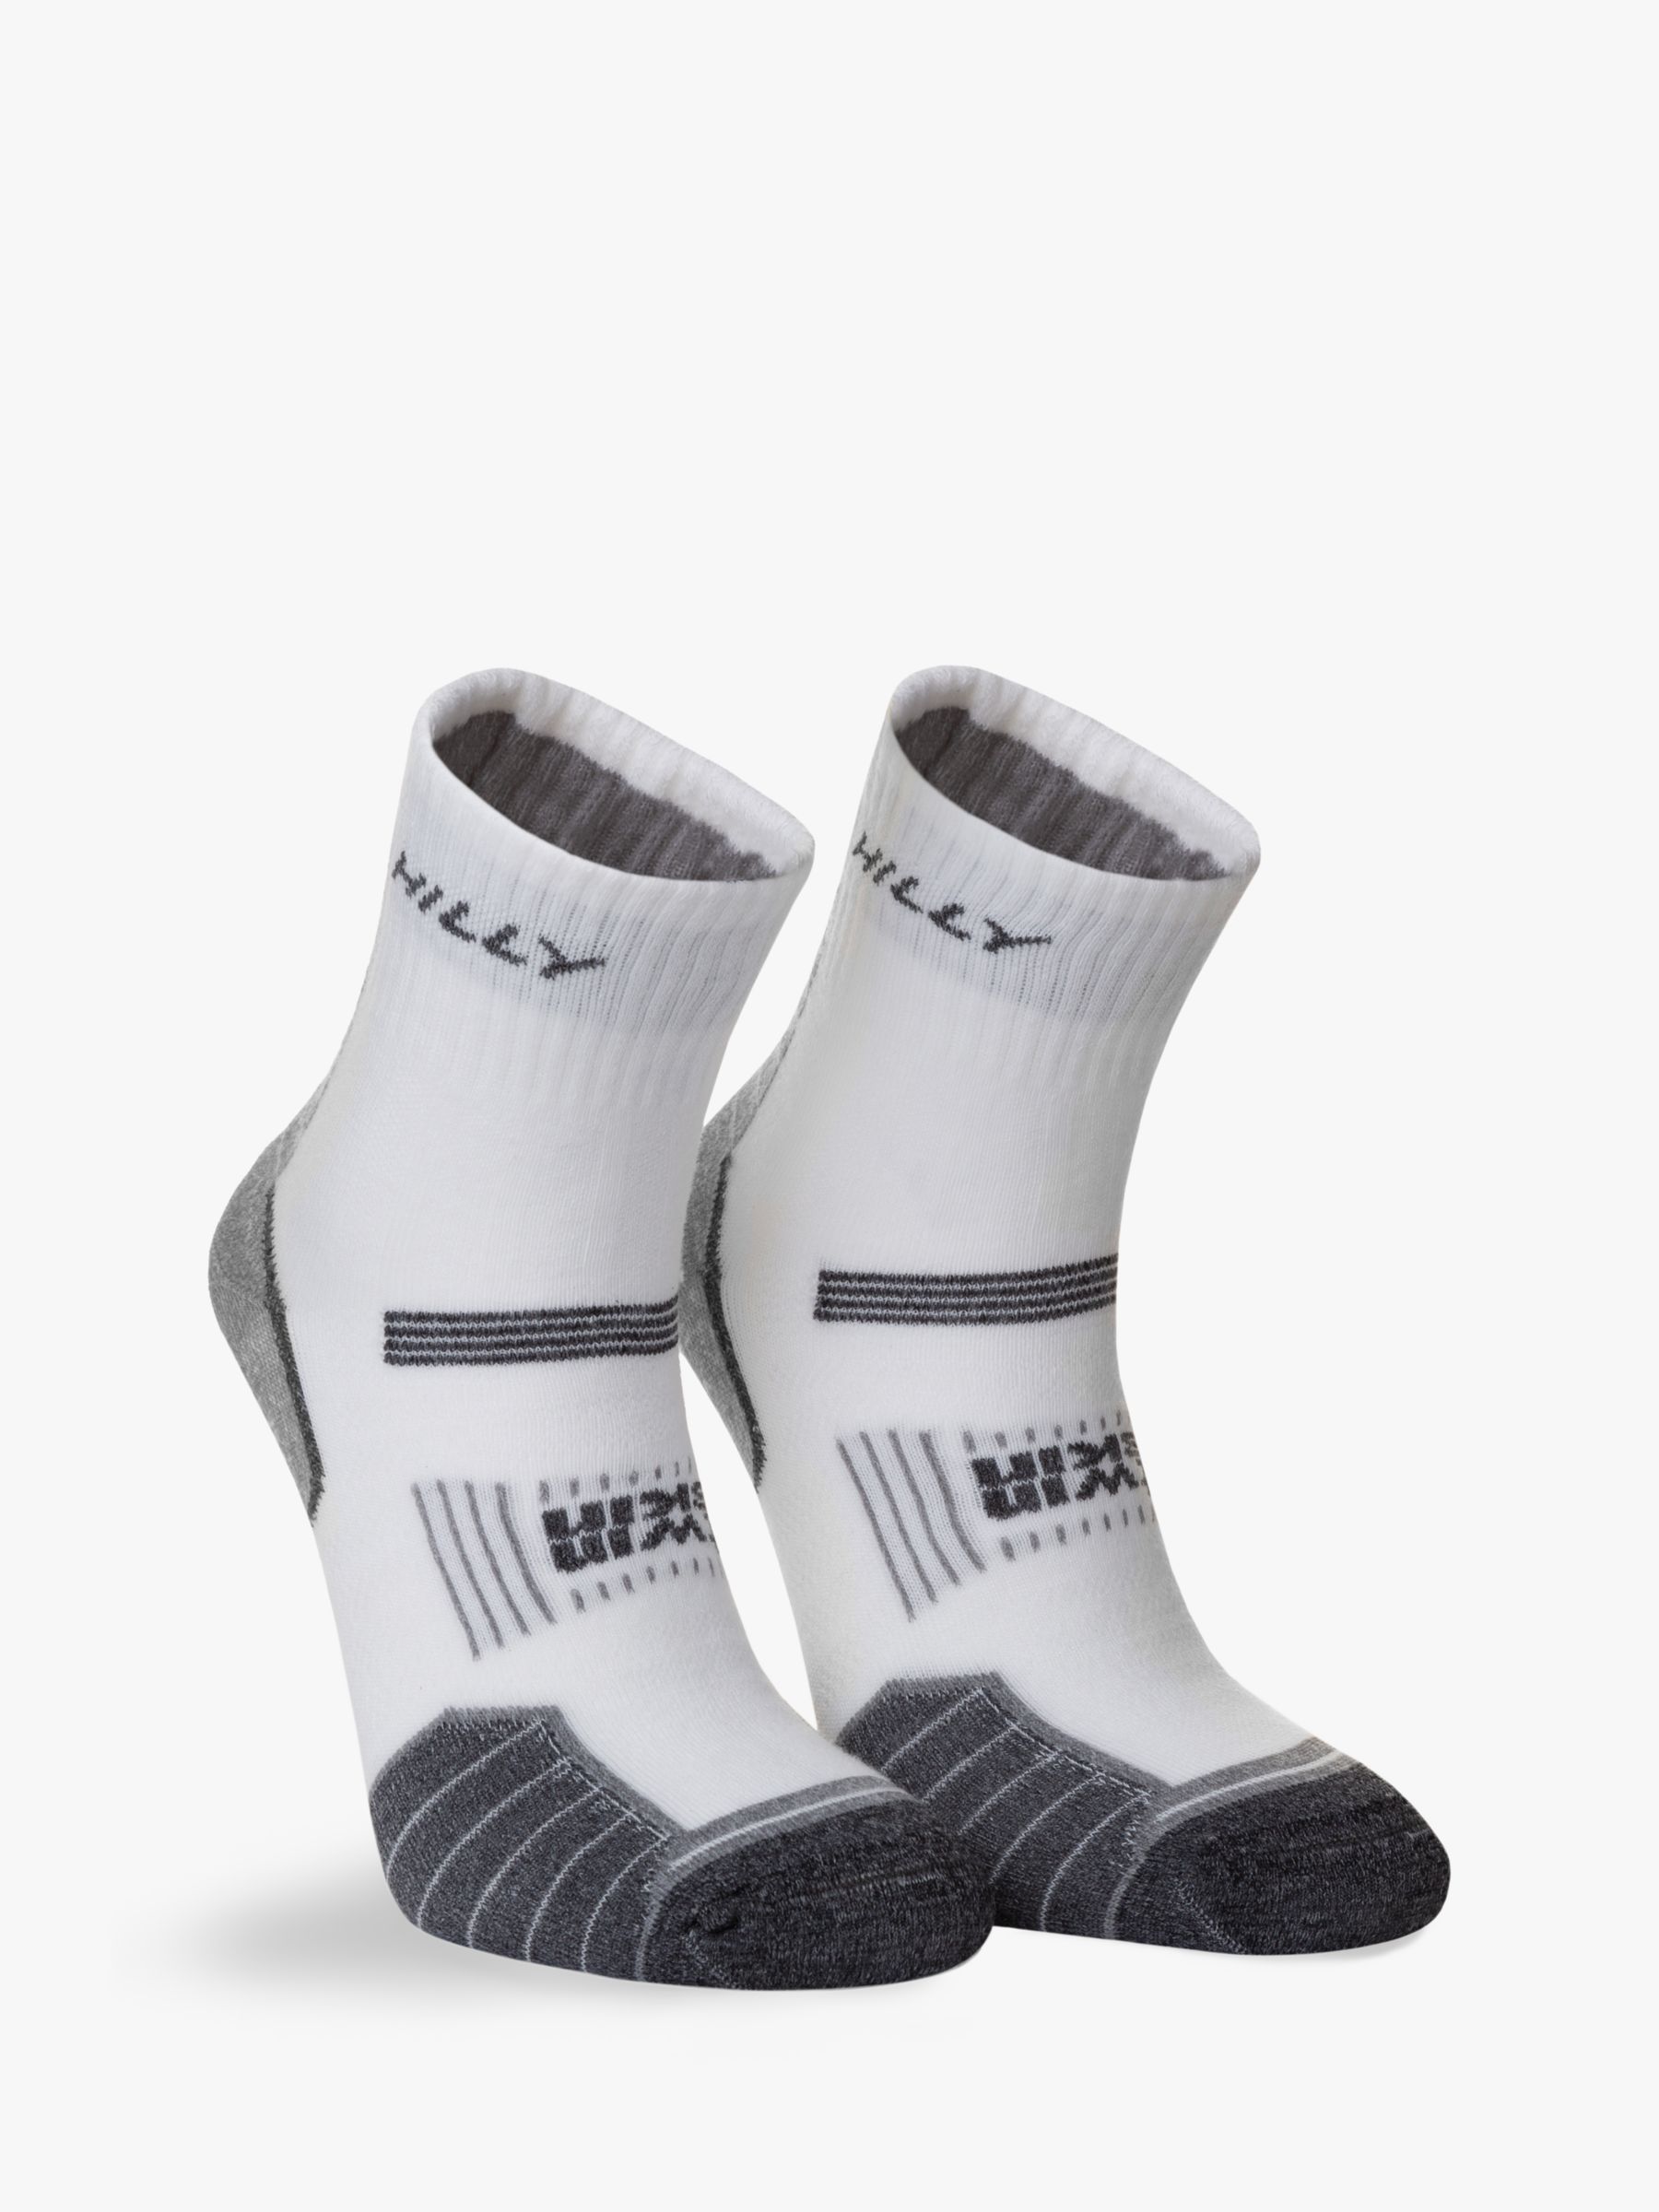 Hilly Twin Skin Ankle Running Socks, White at John Lewis & Partners